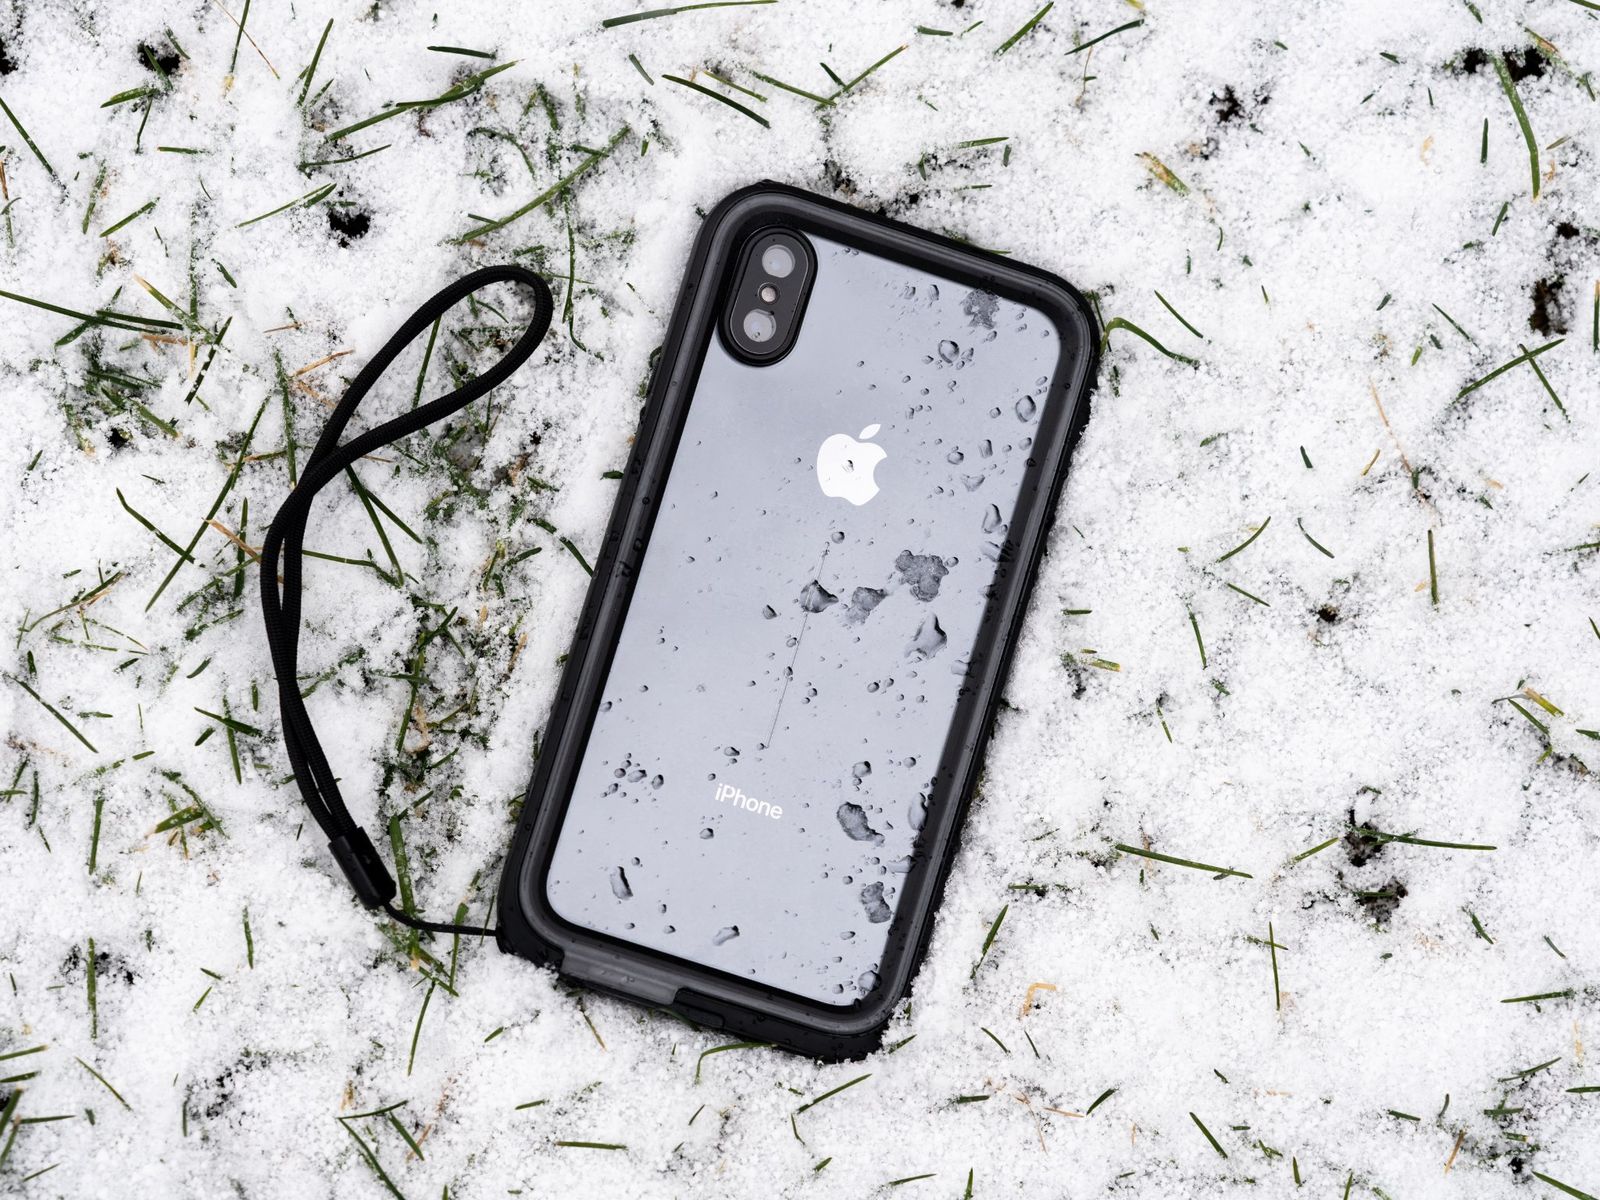 iPhone XS Max with Catalyst Waterproof case